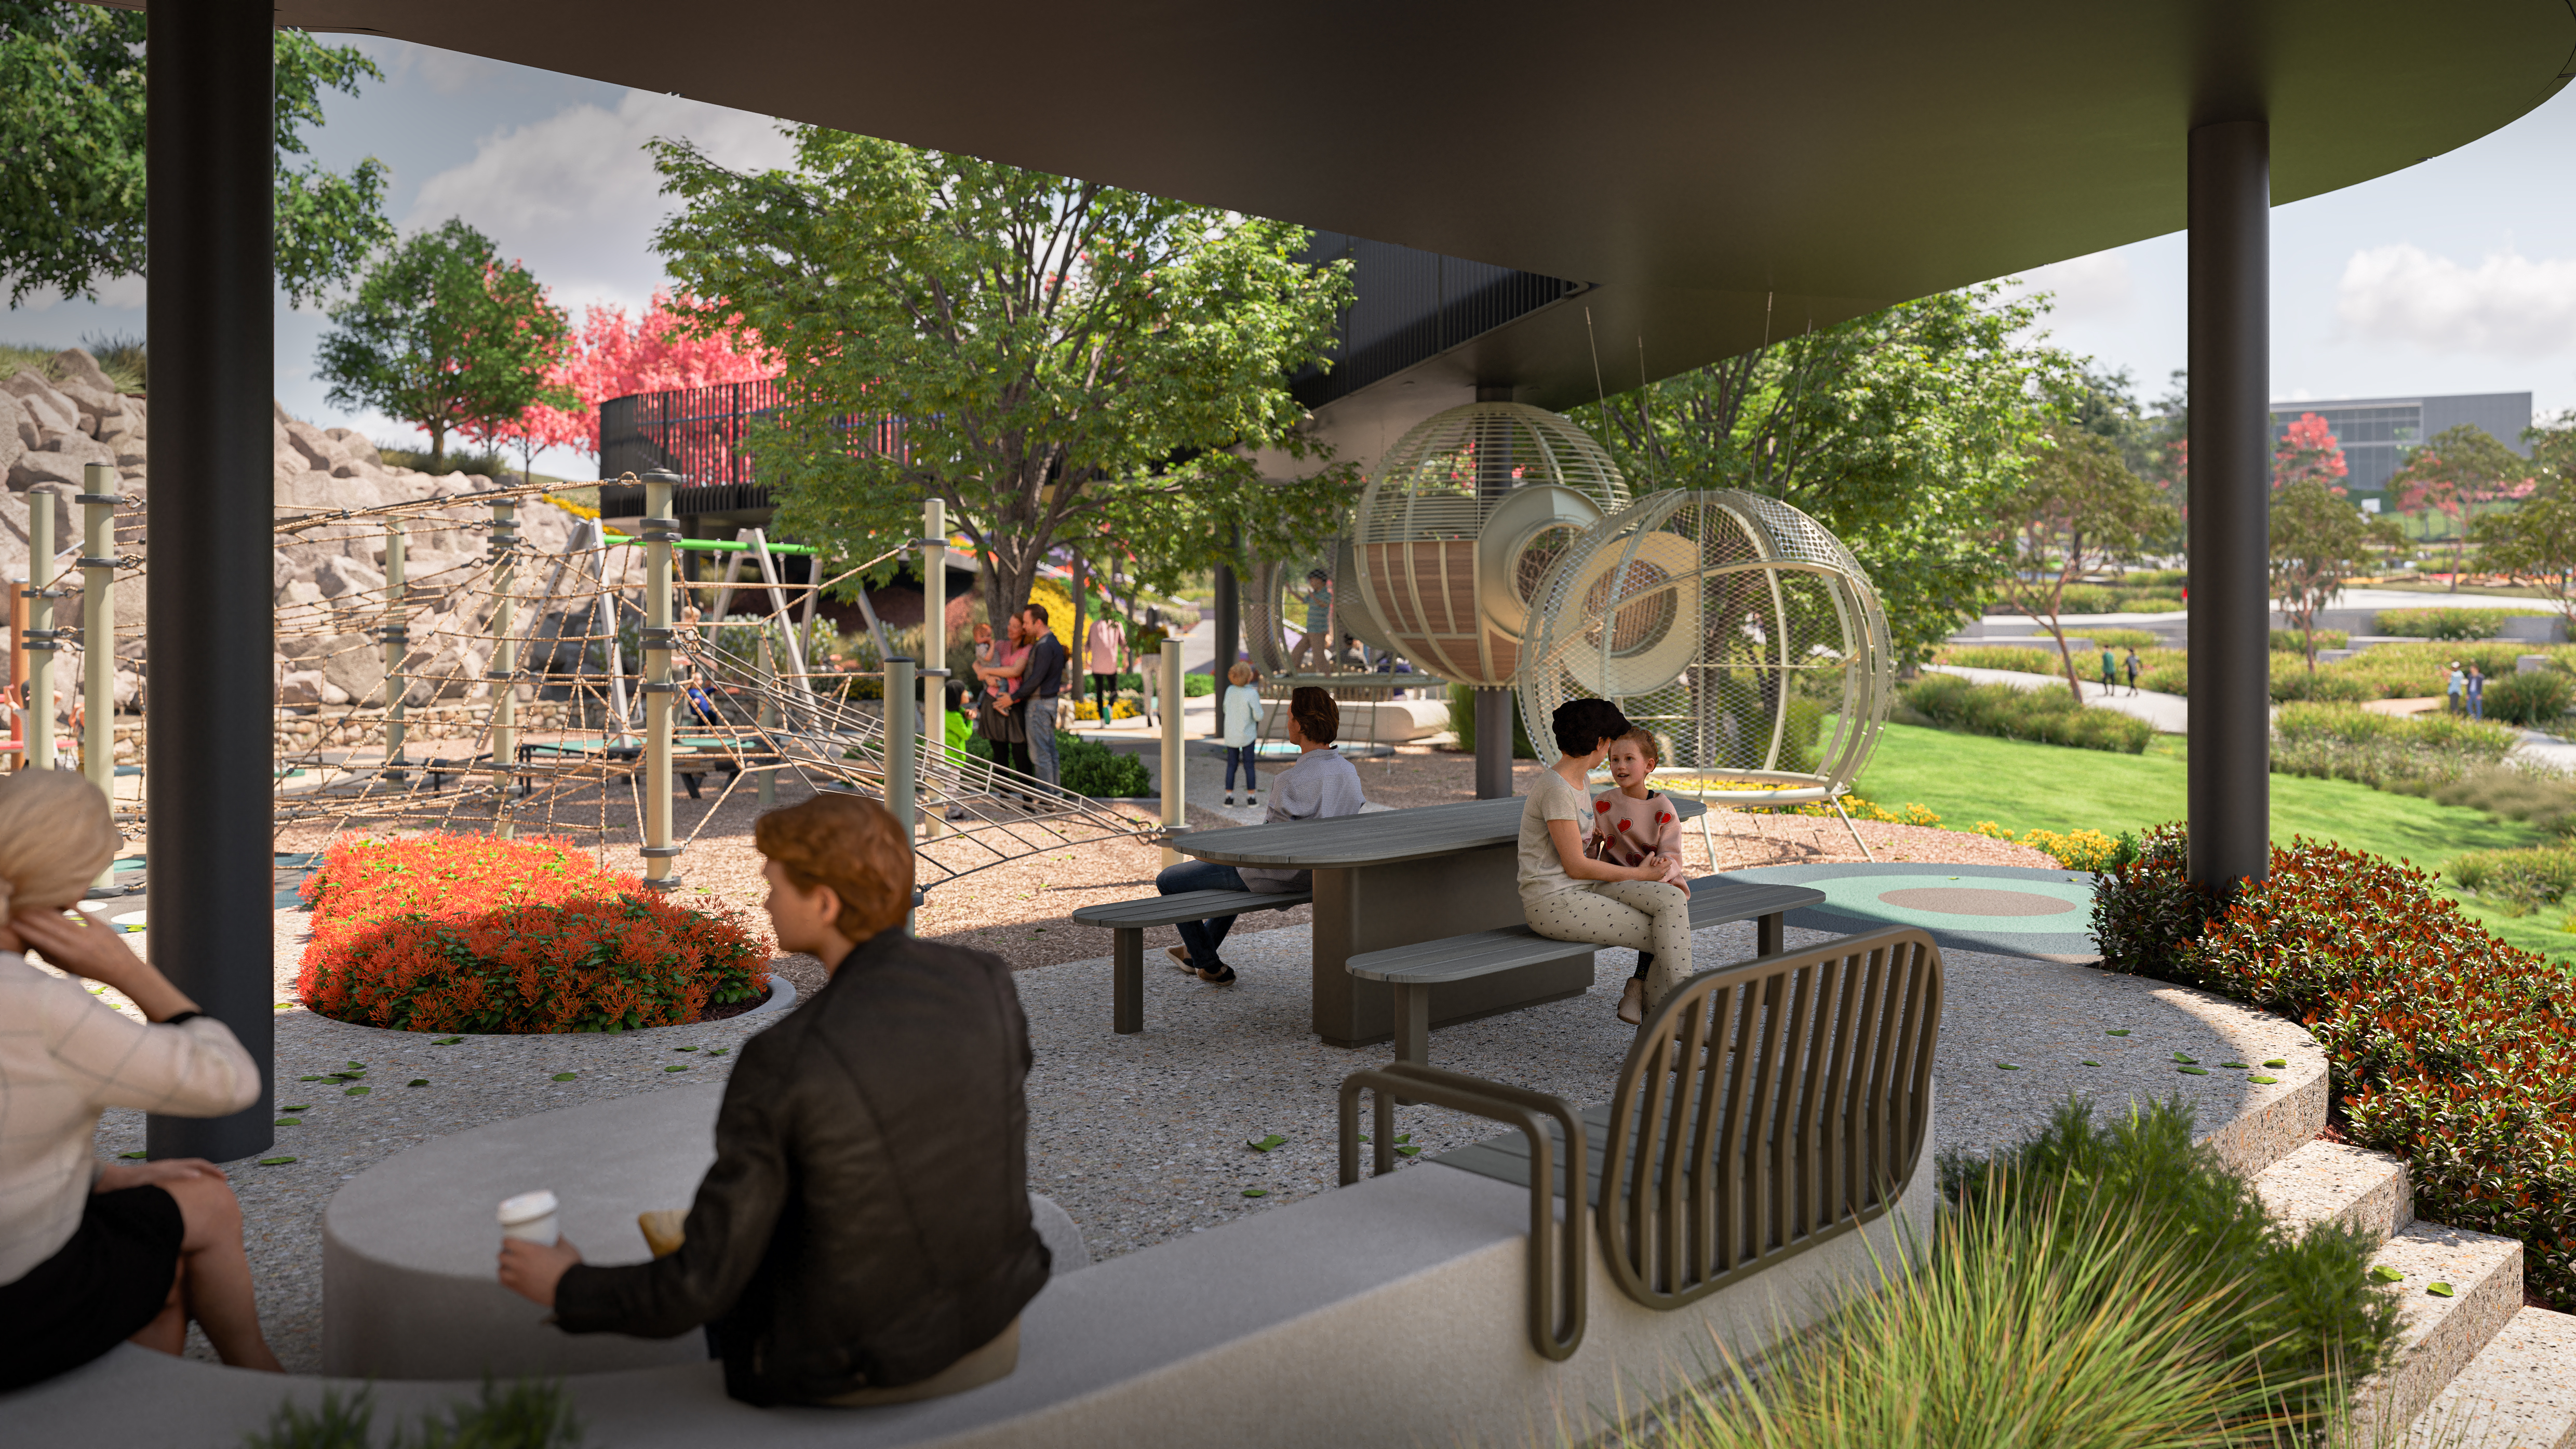 Render of people enjoying the shaded areas at Denman Village Park.